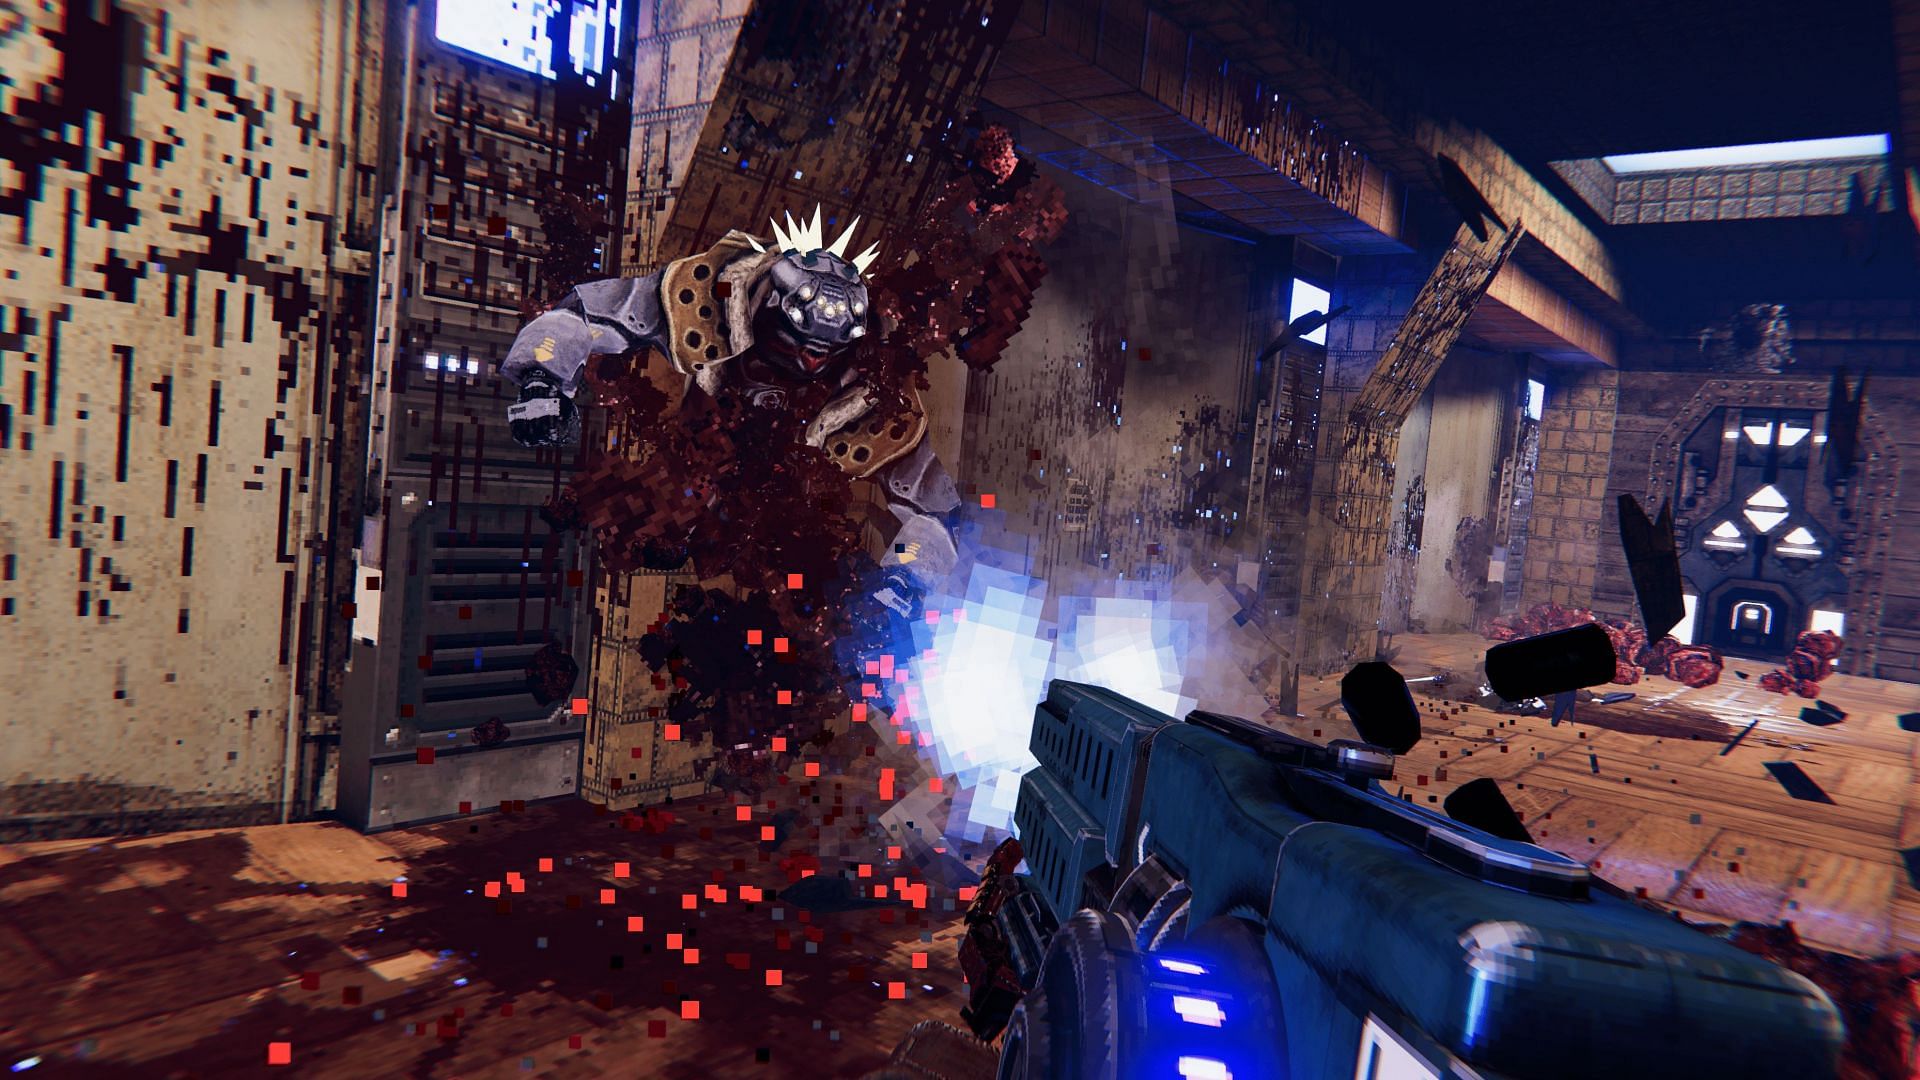 One of the enemies getting mutilated by player guns (Image via Trigger Happy Interactive)